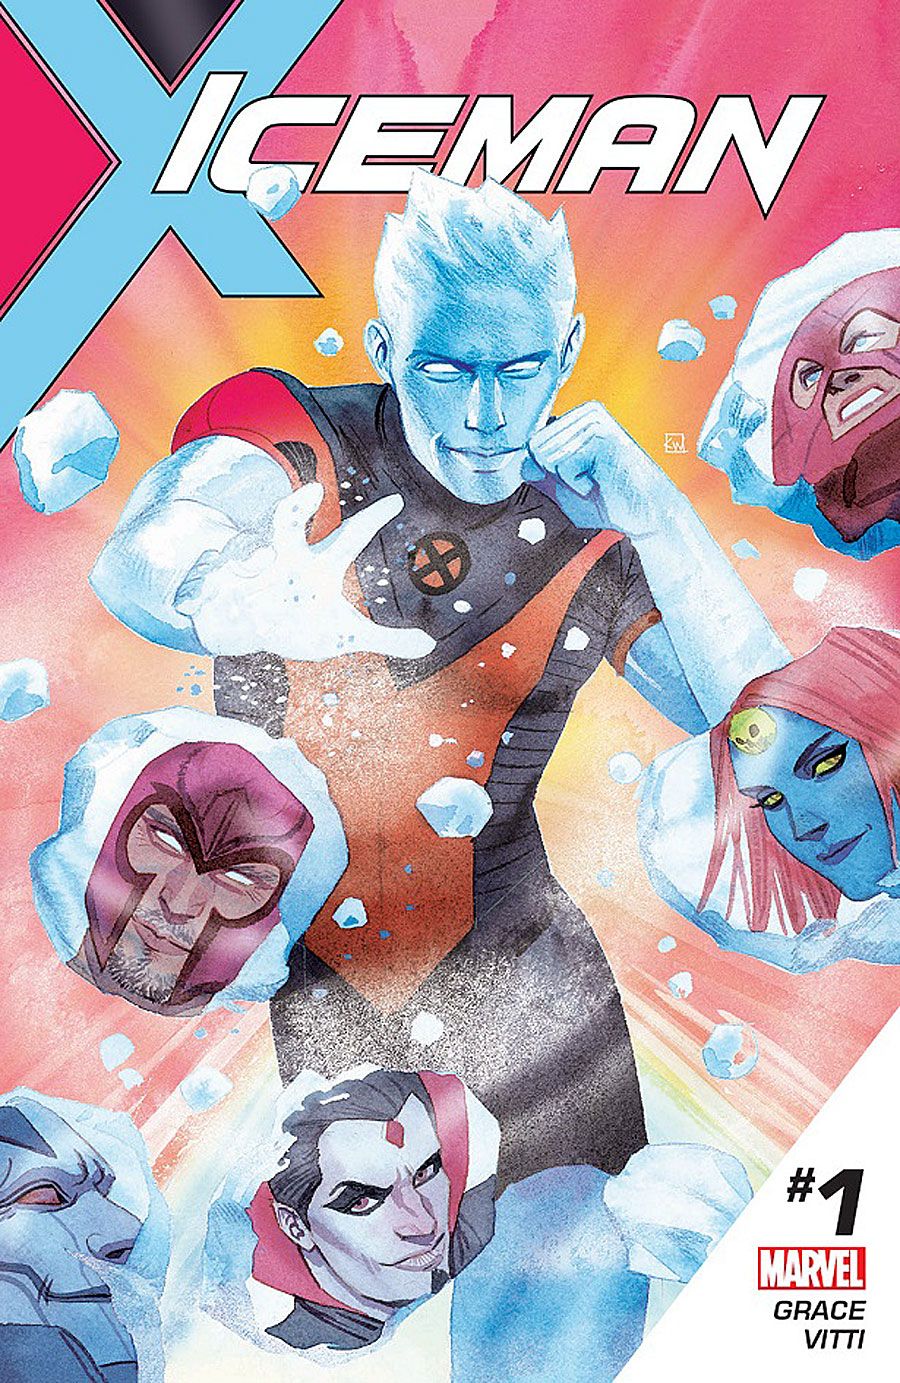 The first look at iceman #1, featuring cover art by Kevin Wada